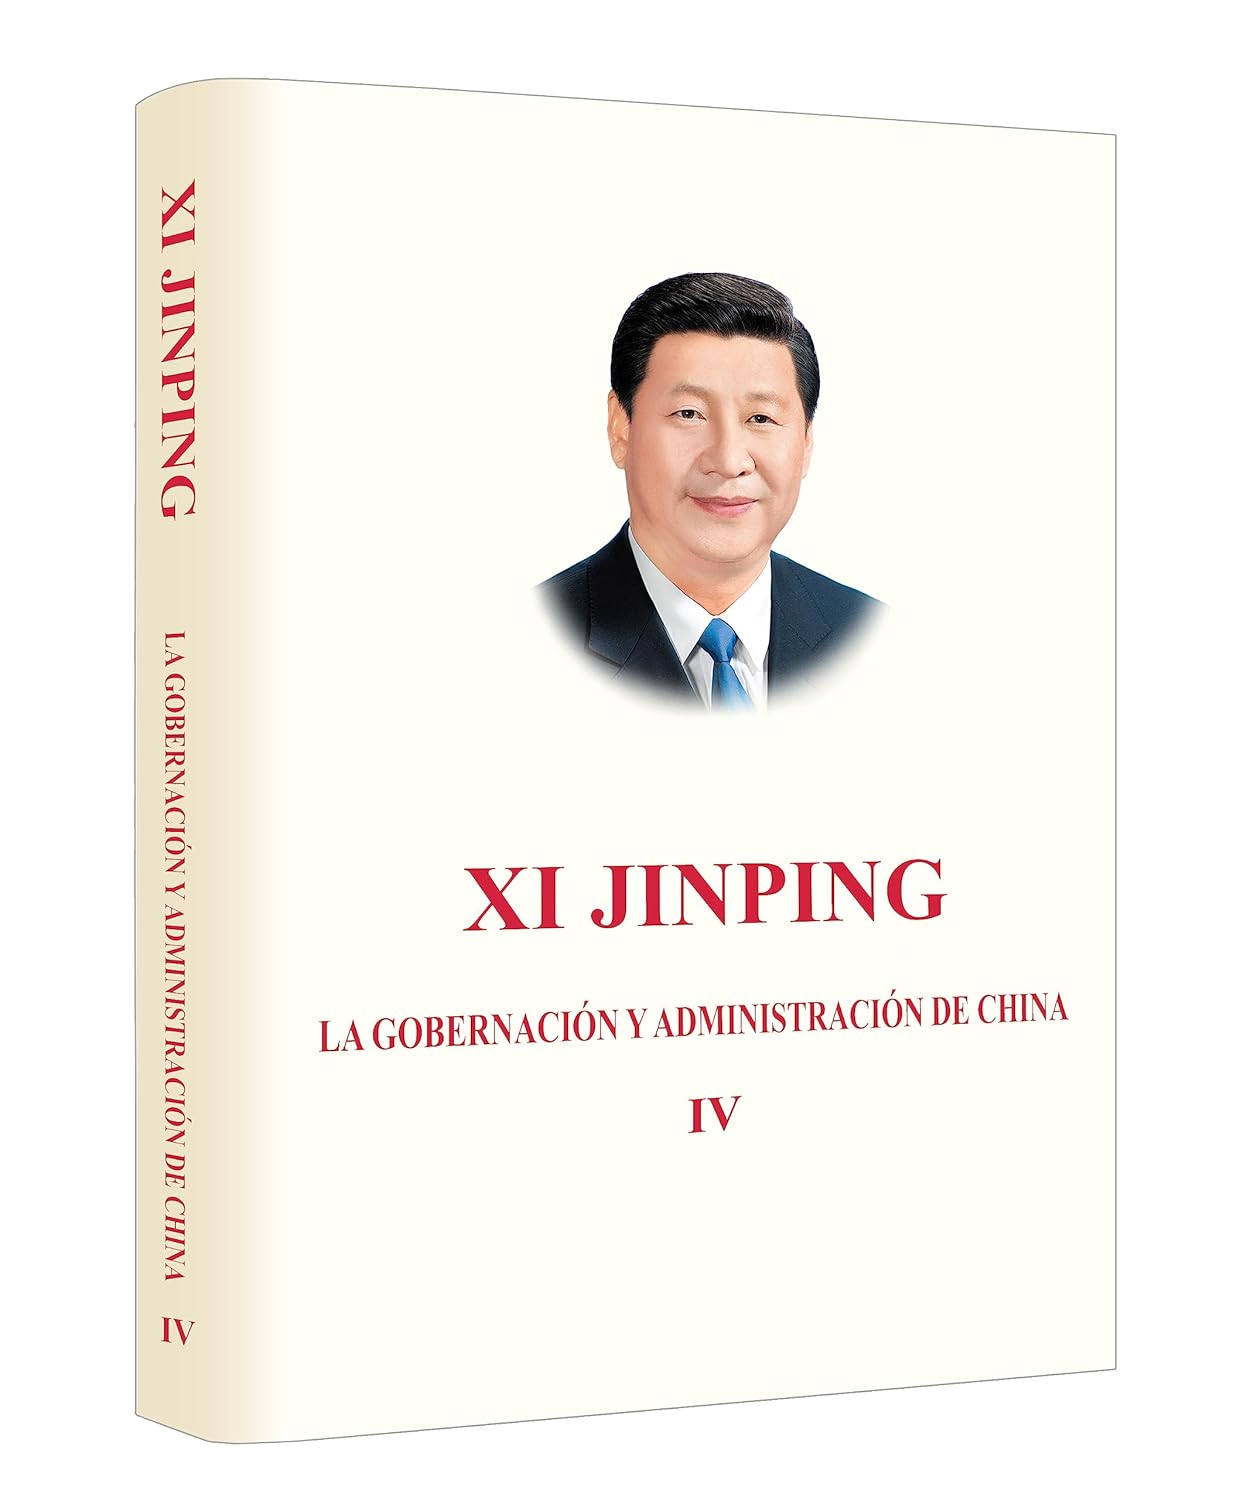 Xi Jinping: The Governance of China Vol. 4 (Spanish) - Hardcover